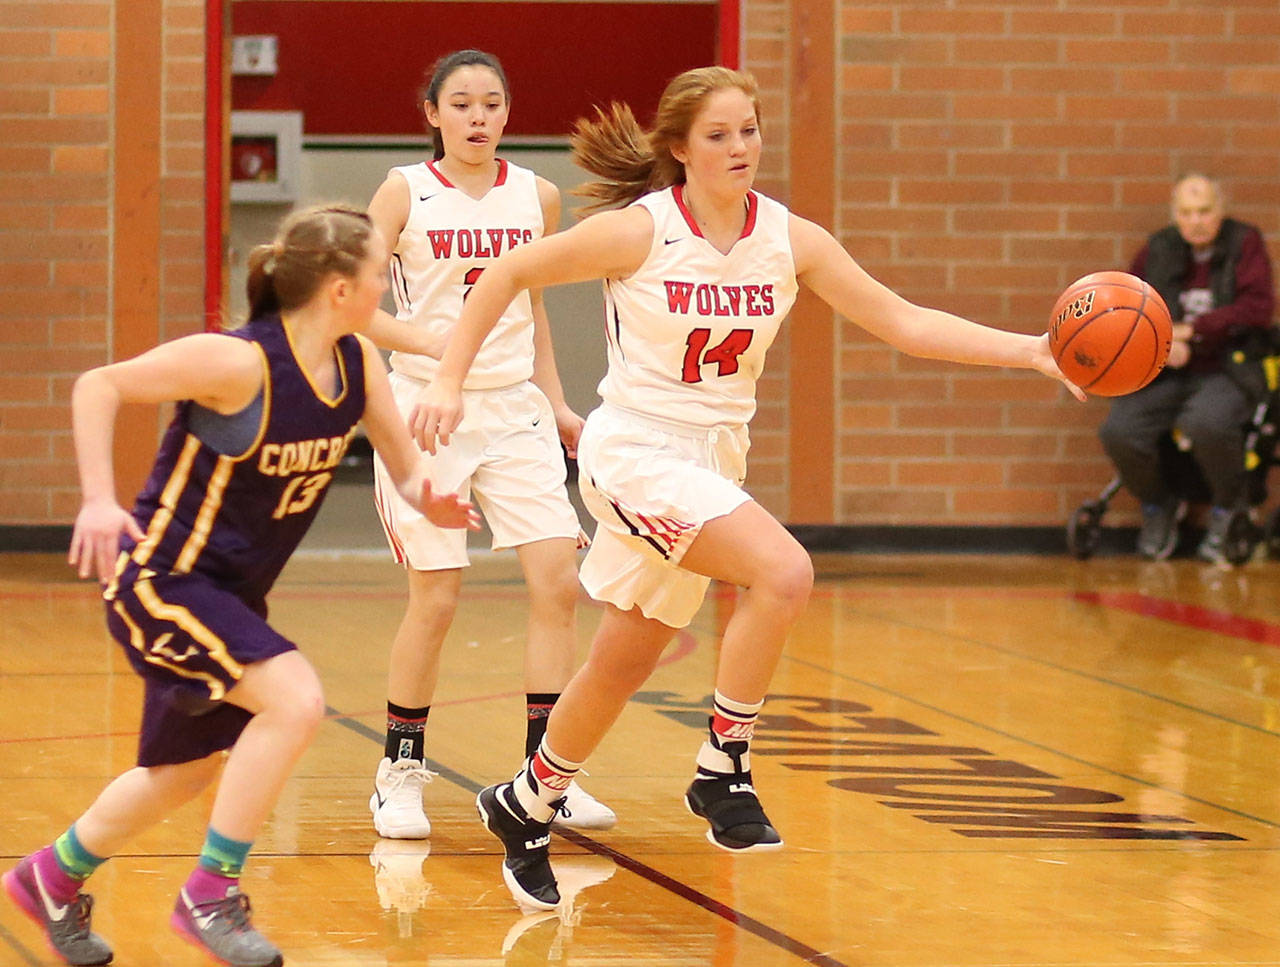 Coupeville’s Ema Smith (14) races by Concrete’s Madisyn Renzelman (13) as Scout Smith looks on.(Photo by John Fisken)